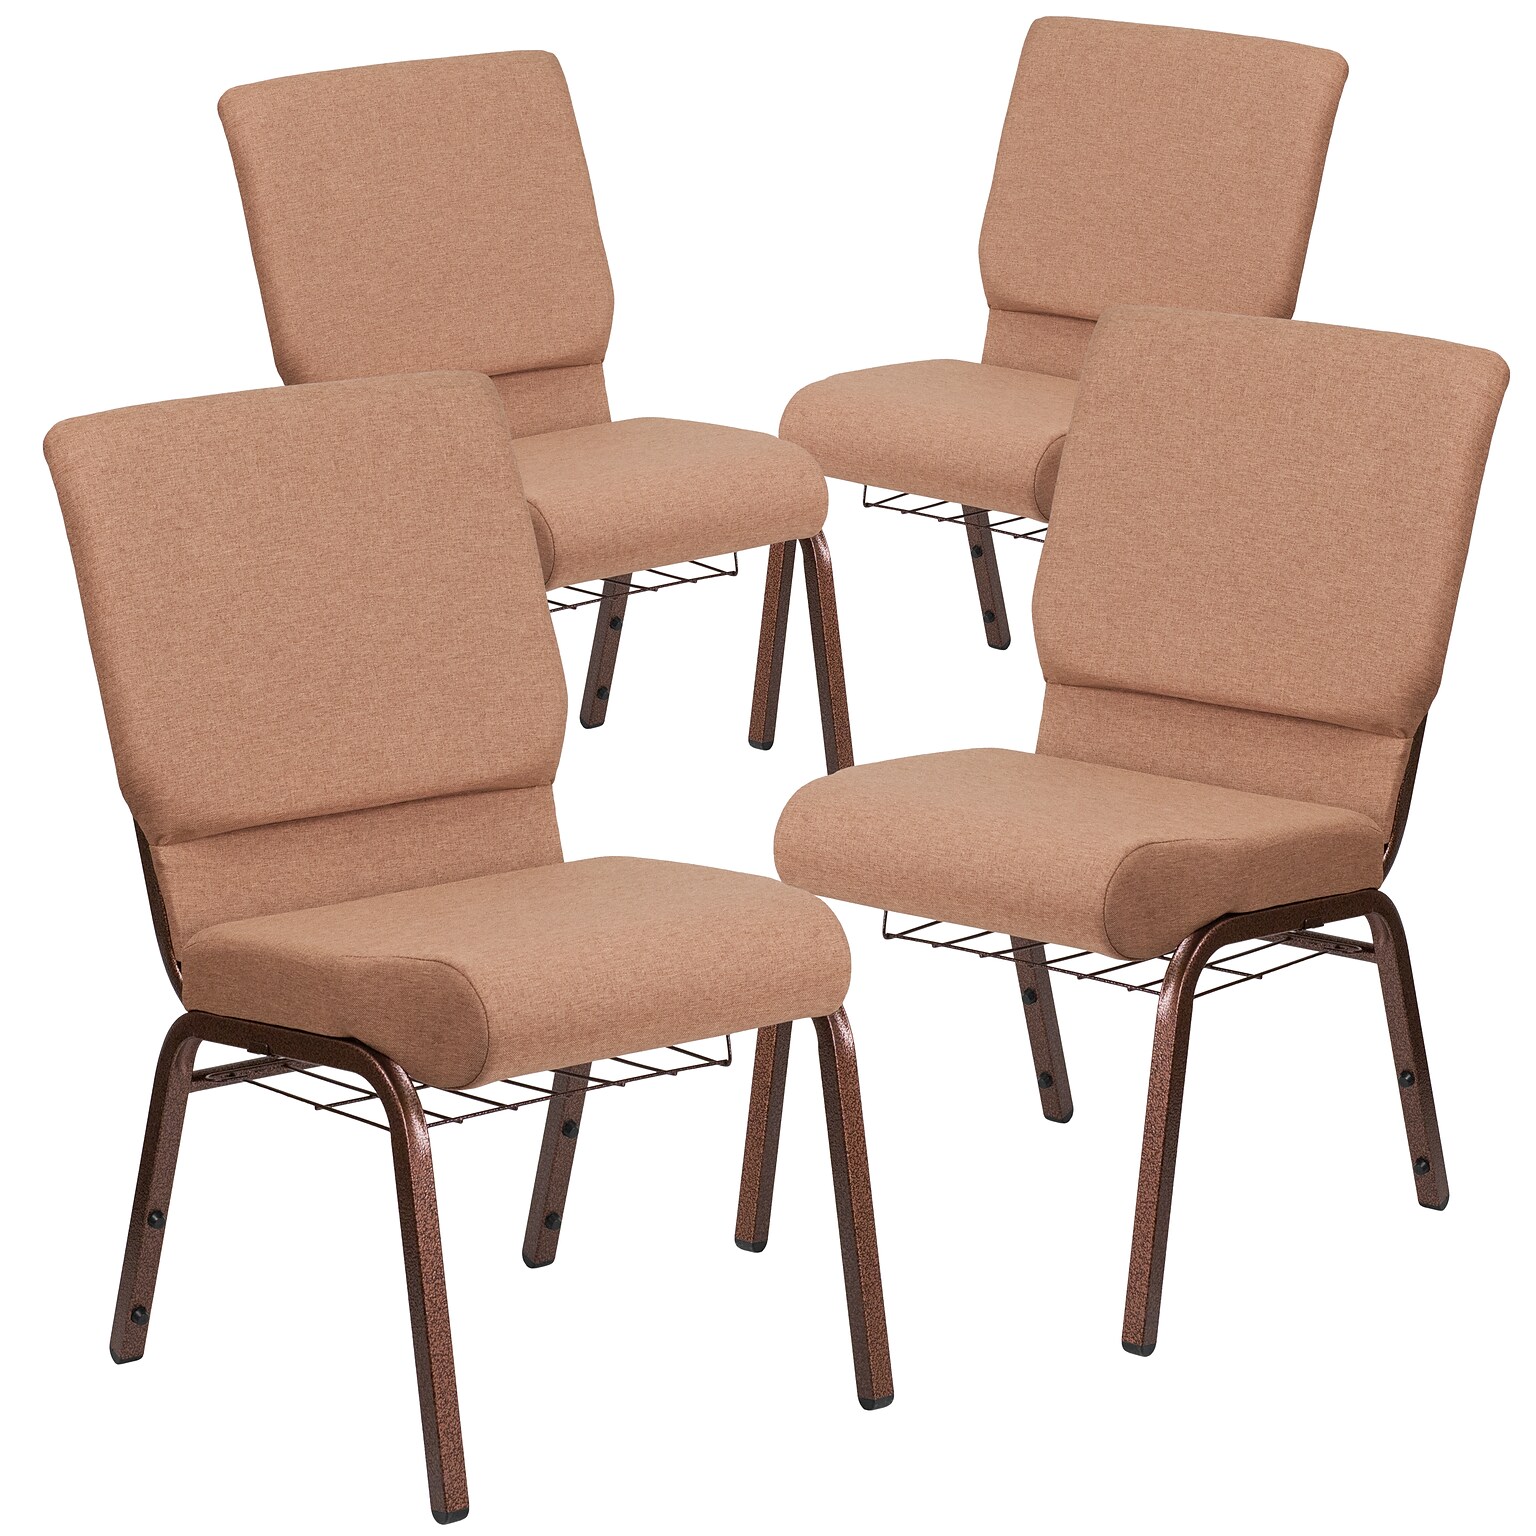 Flash Furniture HERCULES Series Fabric Church Stacking Chair with Book Rack, Caramel/Copper Vein Frame, 4 Pack (4FCH185CVBNB)